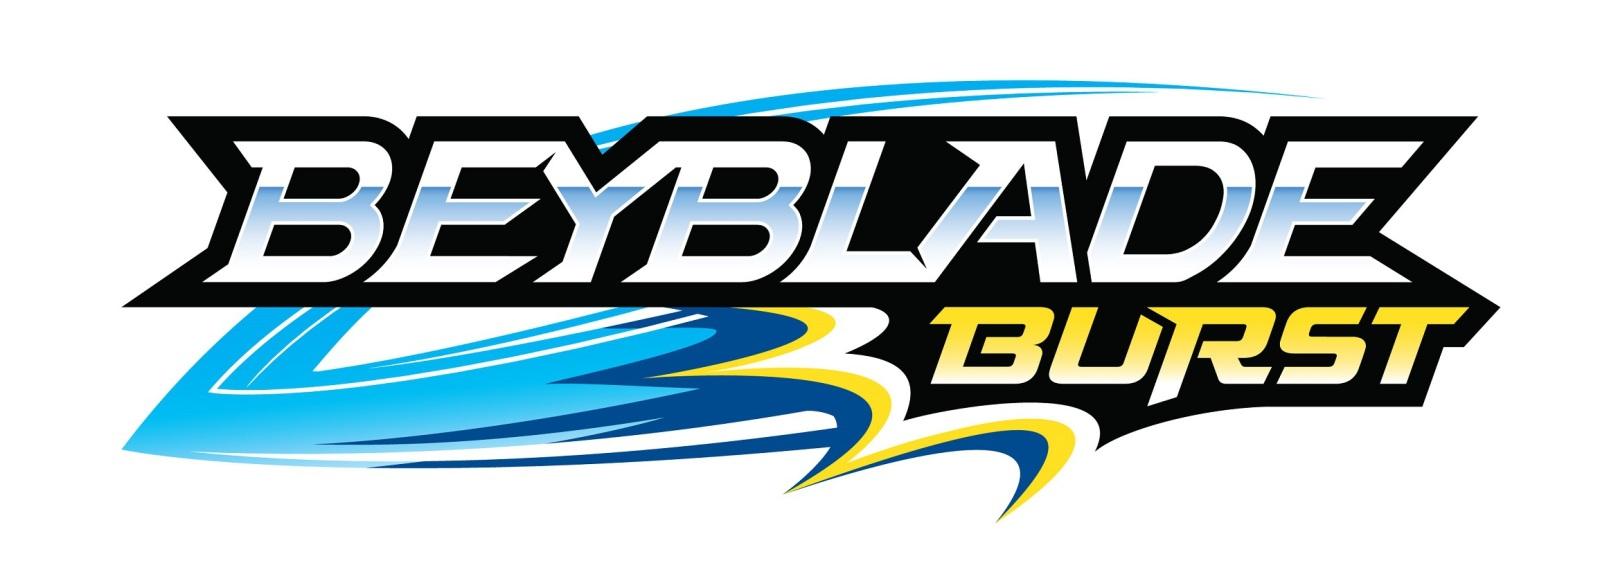 Beyblade Burst Wallpaper (image in Collection)